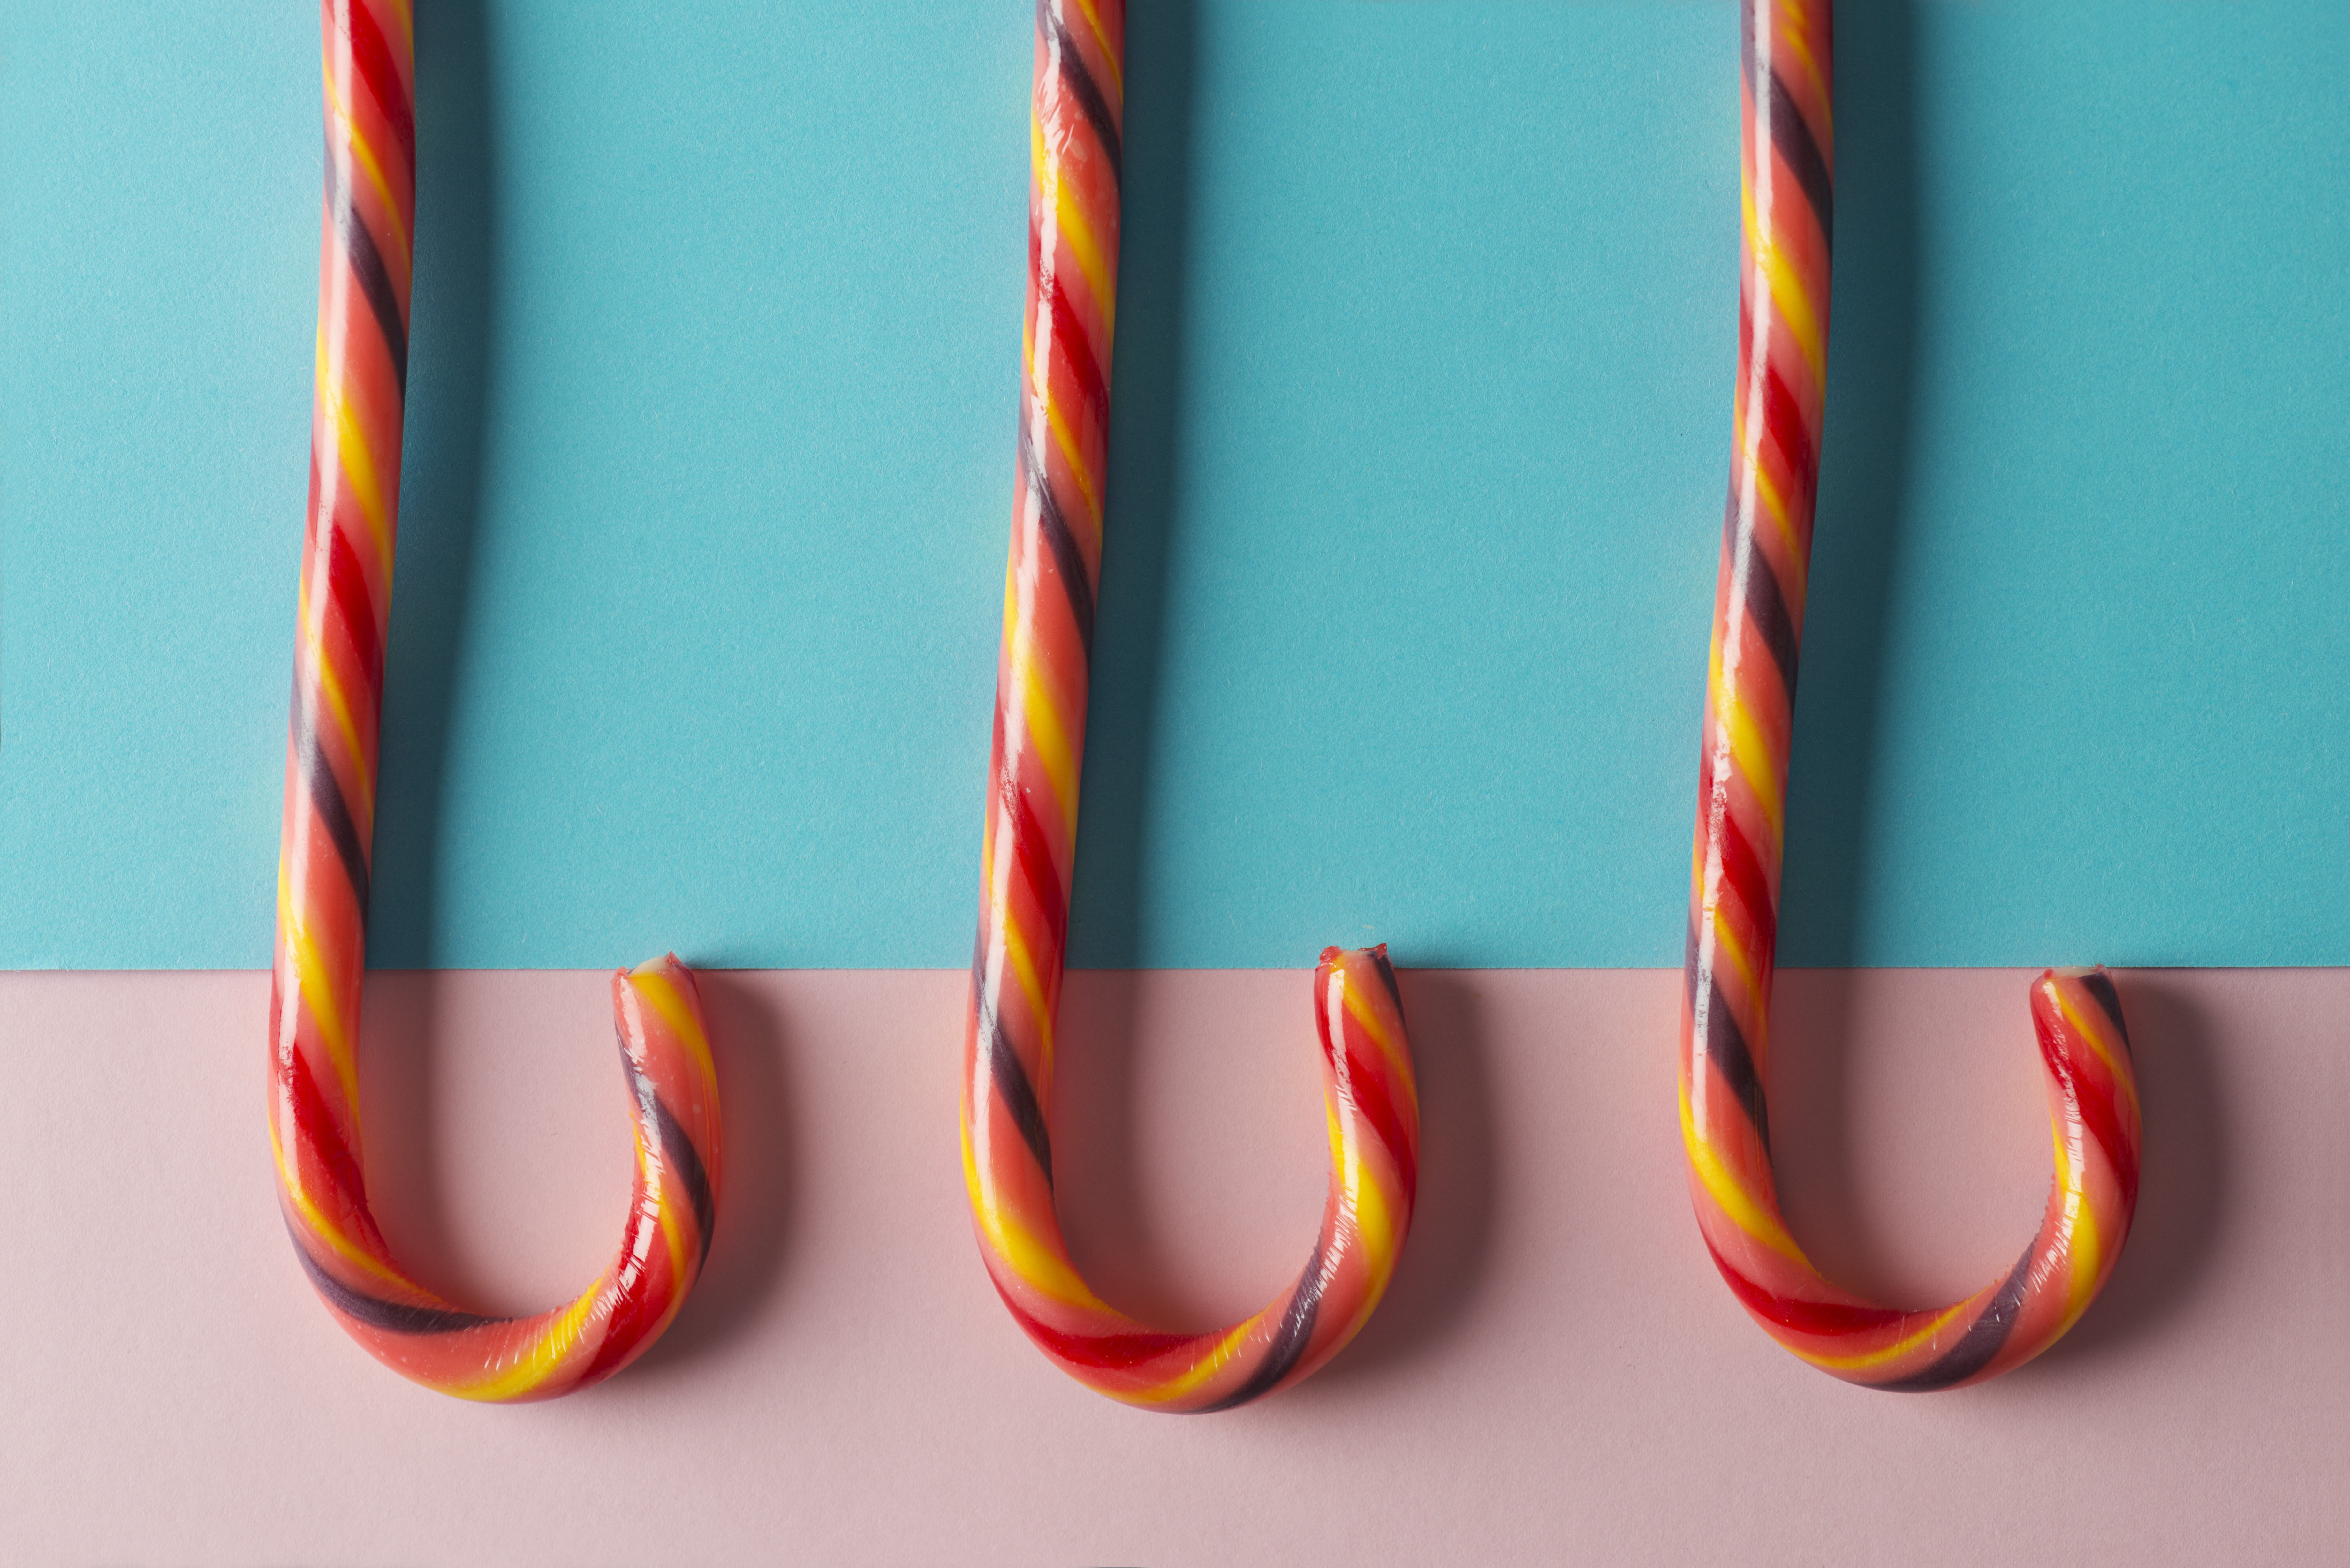 Mac and cheese candy canes are a thing and I don’t know how I feel about it